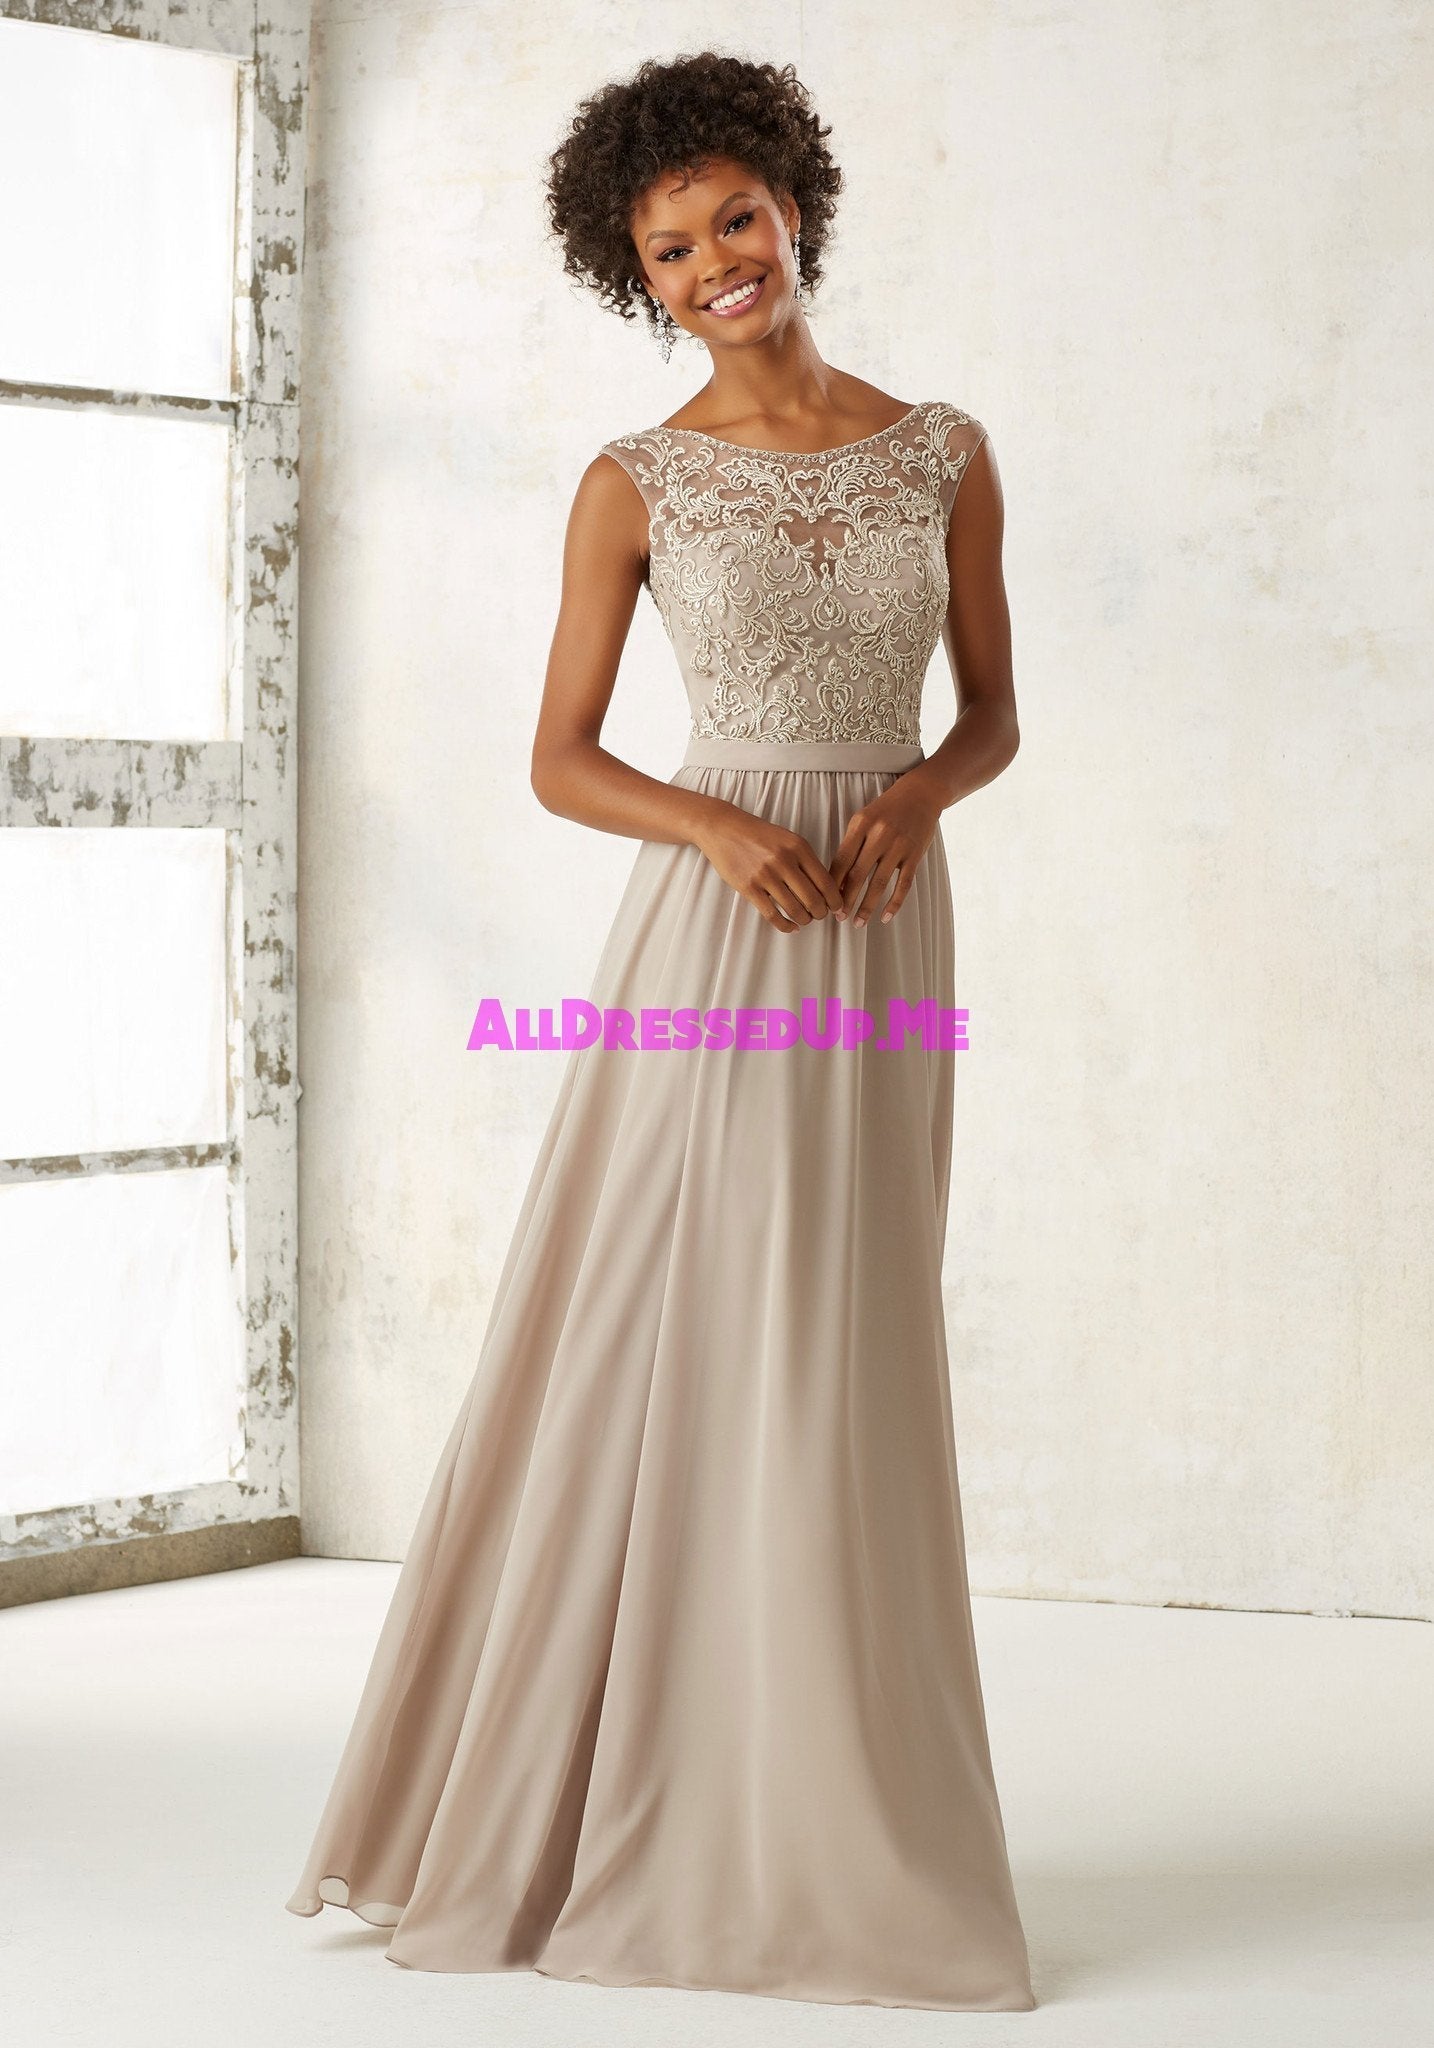 Morilee Bridesmaids Dresses - 21522 - All Dressed Up - Morilee - - Dresses Wedding Chattanooga Hixson Shops Boutiques Tennessee TN Georgia GA MSRP Lowest Prices Sale Discount